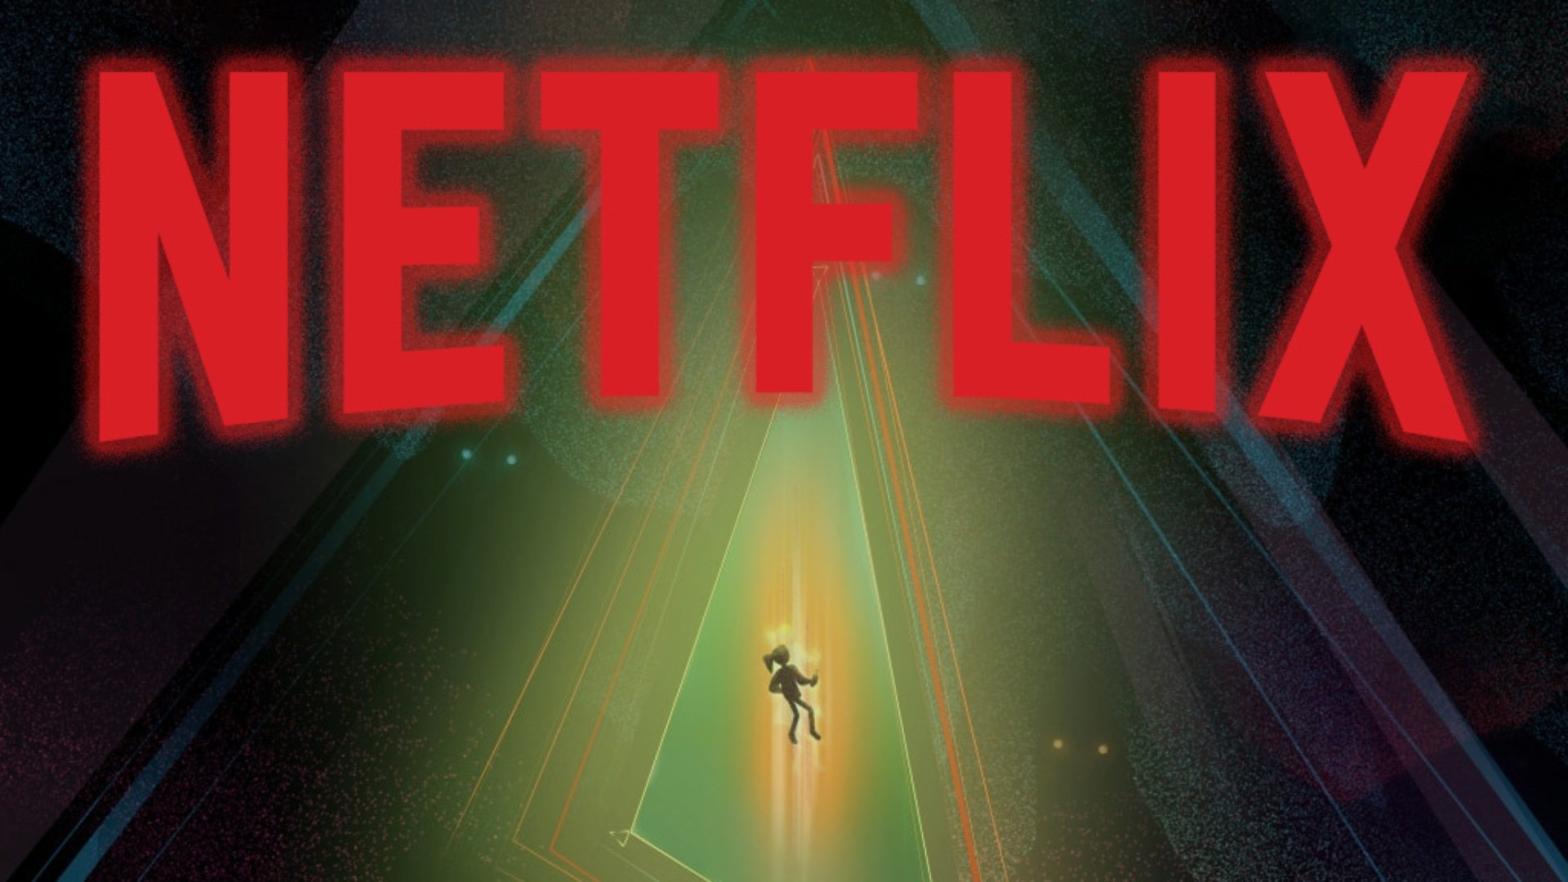 Does this mean an Oxenfree limited series could be a thing? (Image: Netflix / Night School Studio / Kotaku)